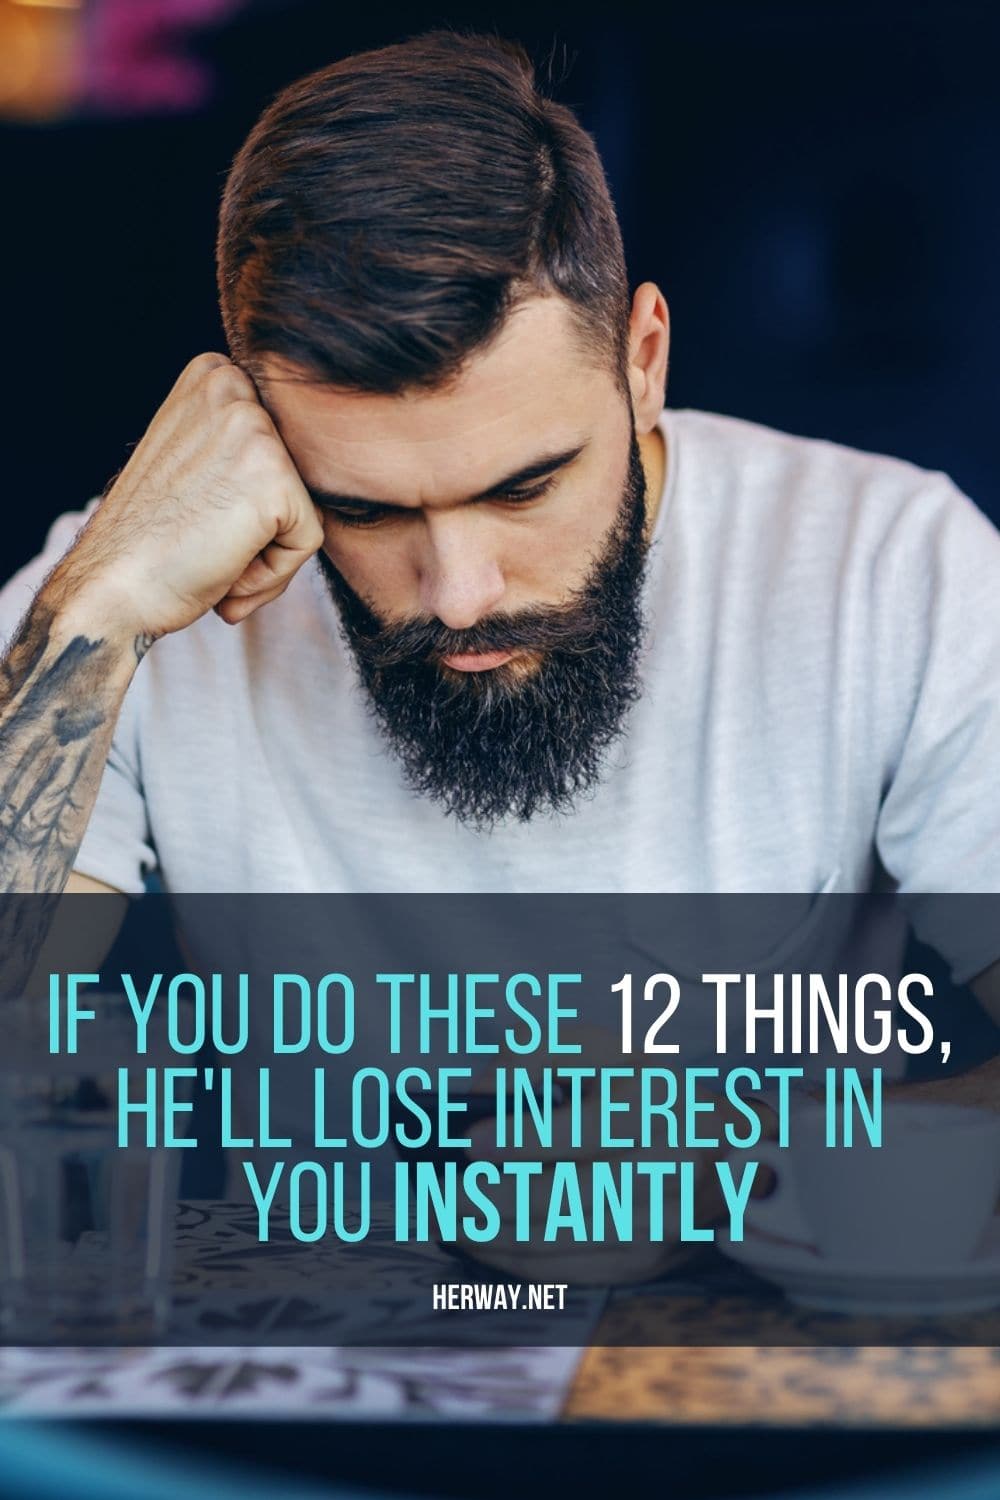 If You Do These 12 Things, Hell Lose Interest In You Instantly